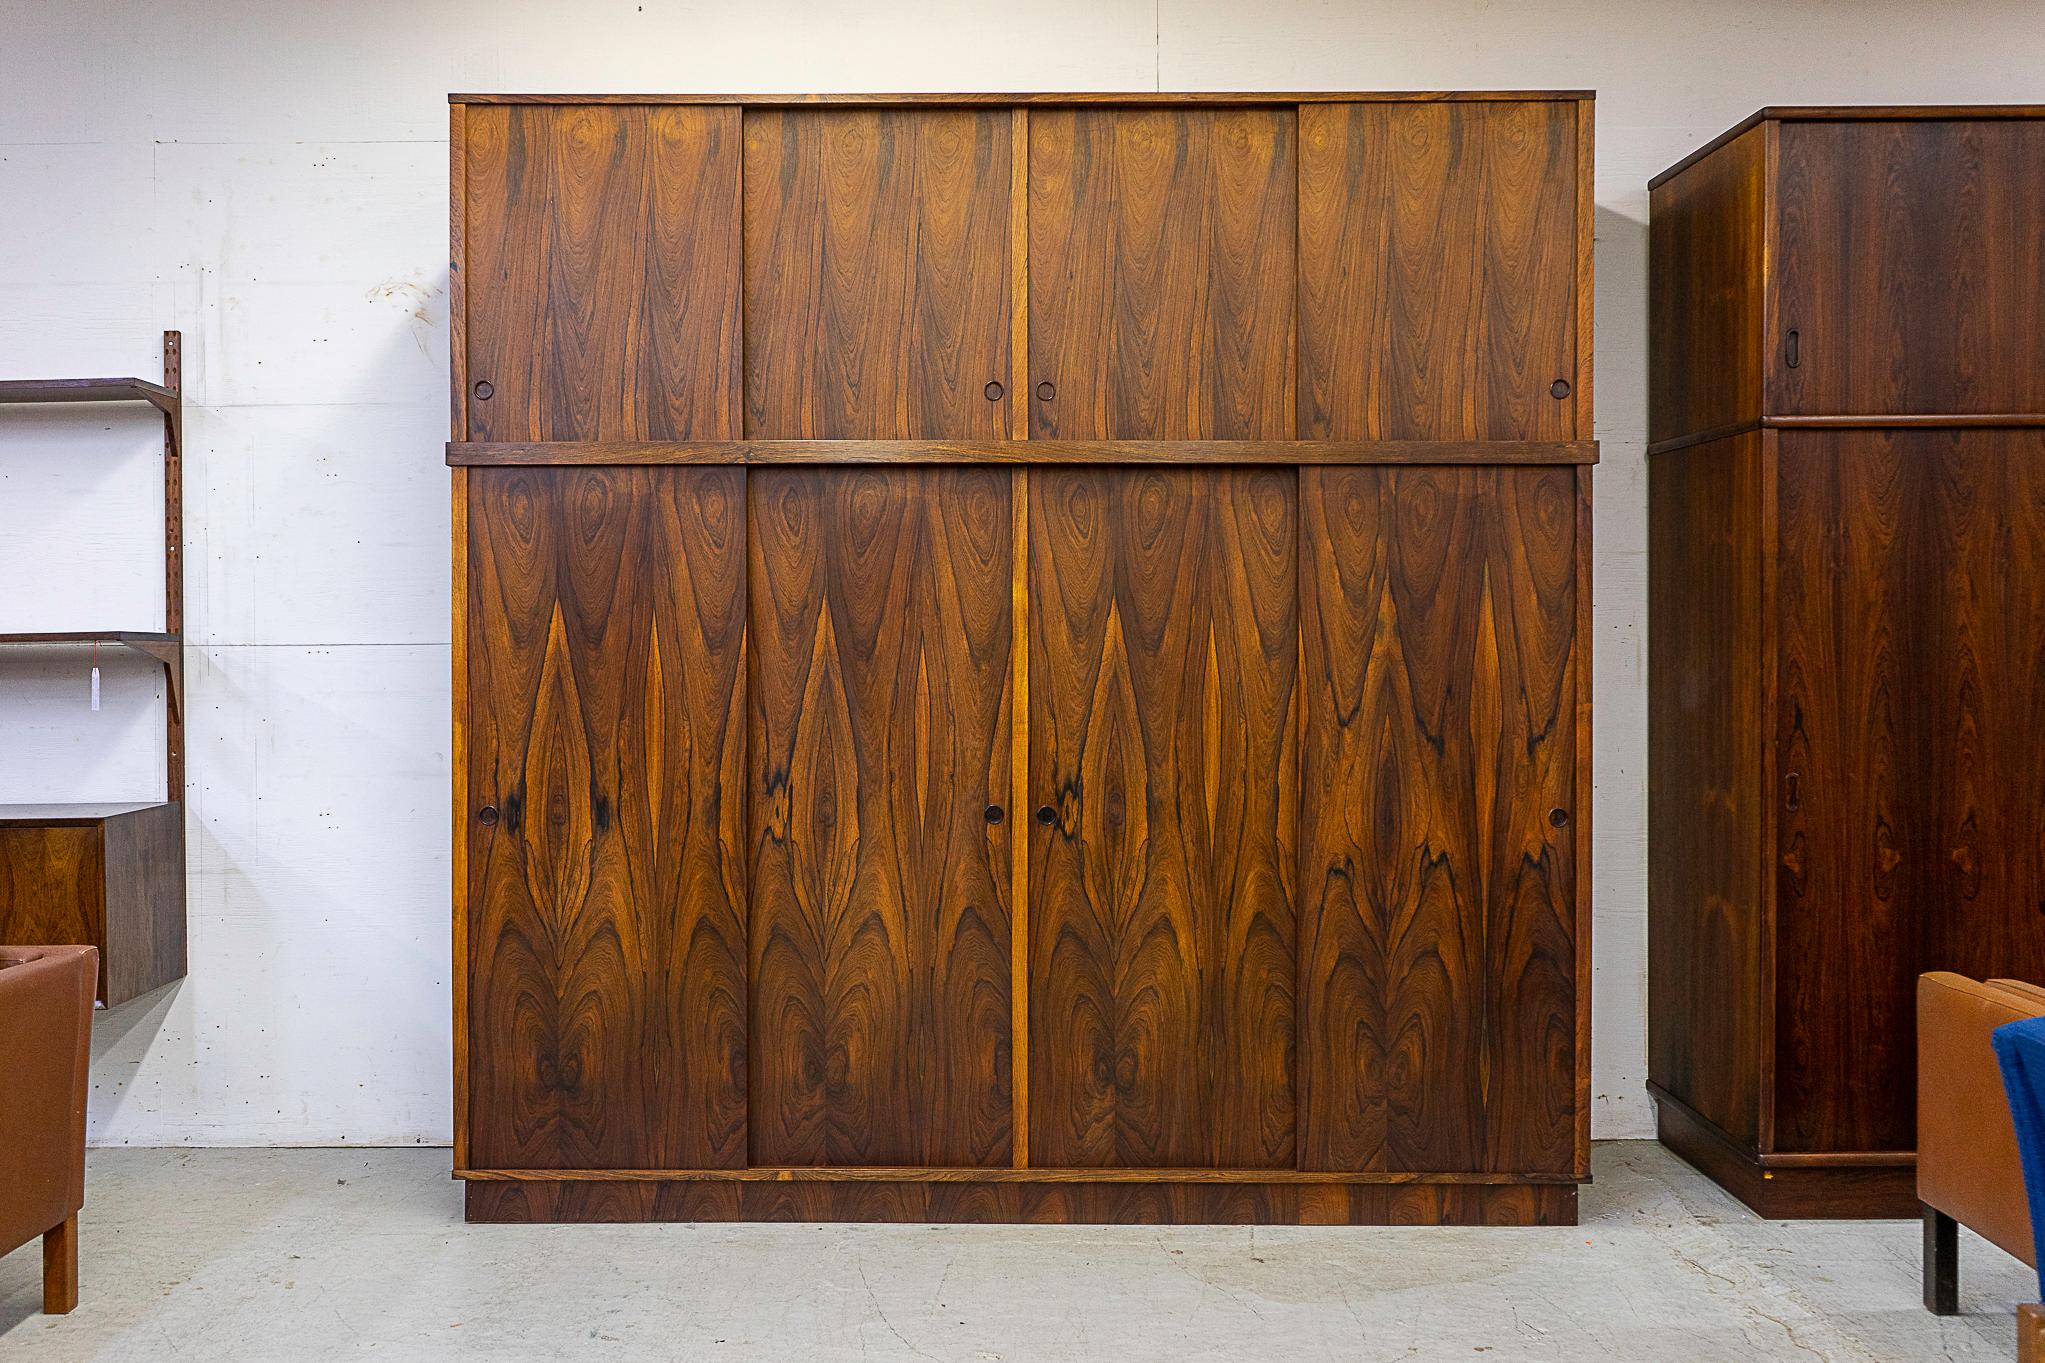 Rosewood quadruple bank Danish wardrobe, circa 1950s. Absolutely stunning grain patterning on this beautifully balanced piece! Highly functional double decker model, with open storage, drawers and hanger bars. Multiple pieces of furniture all